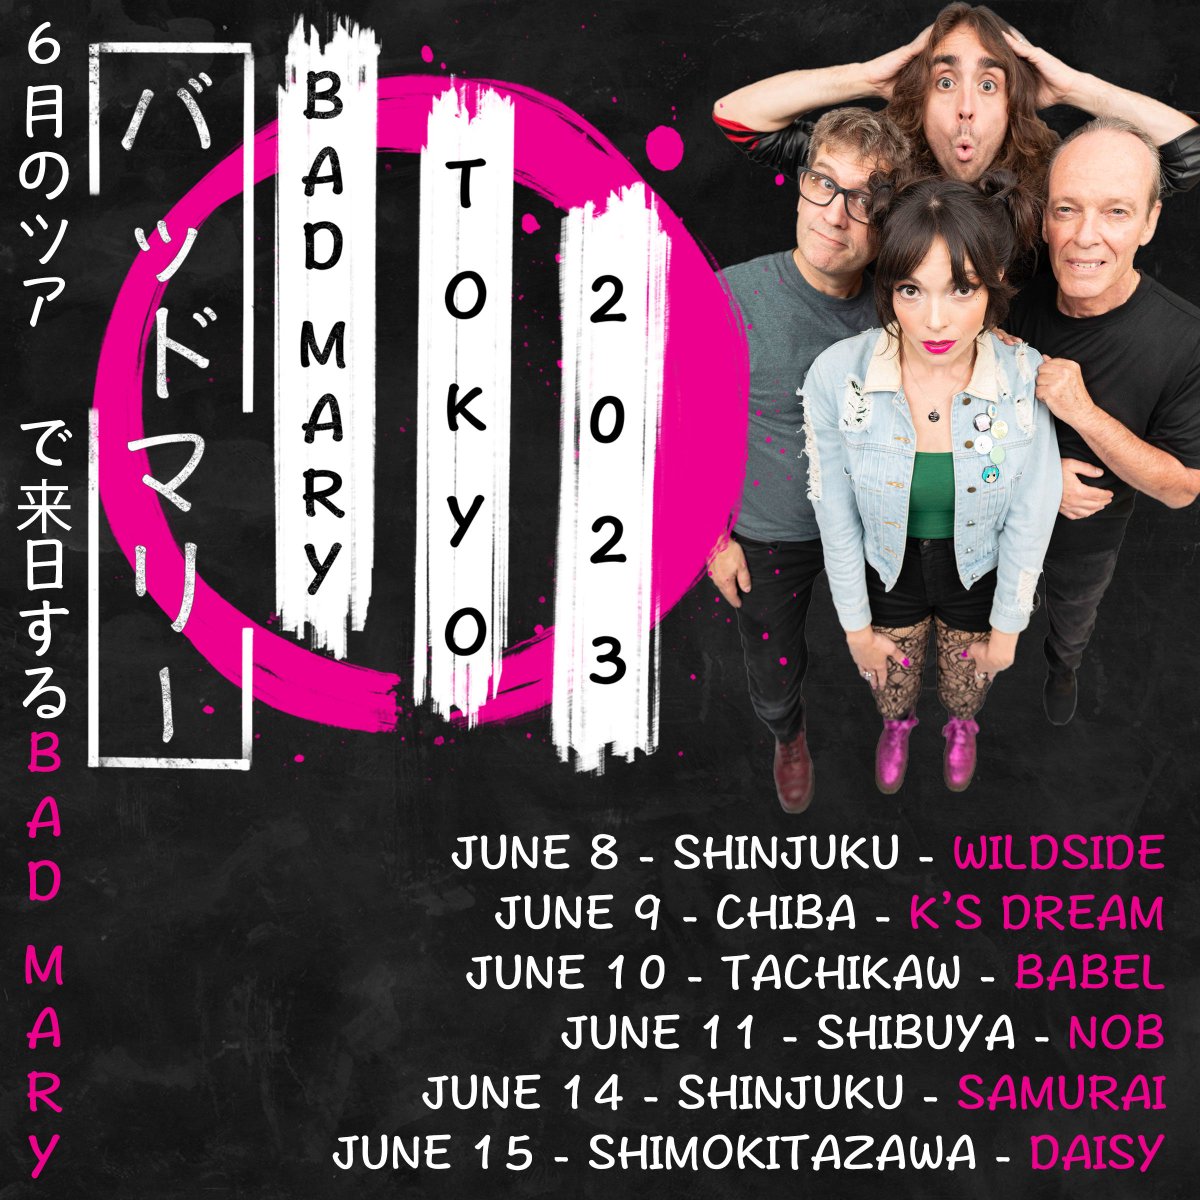 We're a few weeks away from our tour of Japan! Thanks to @interidoru for setting this up for us! #tour #japan #japantour